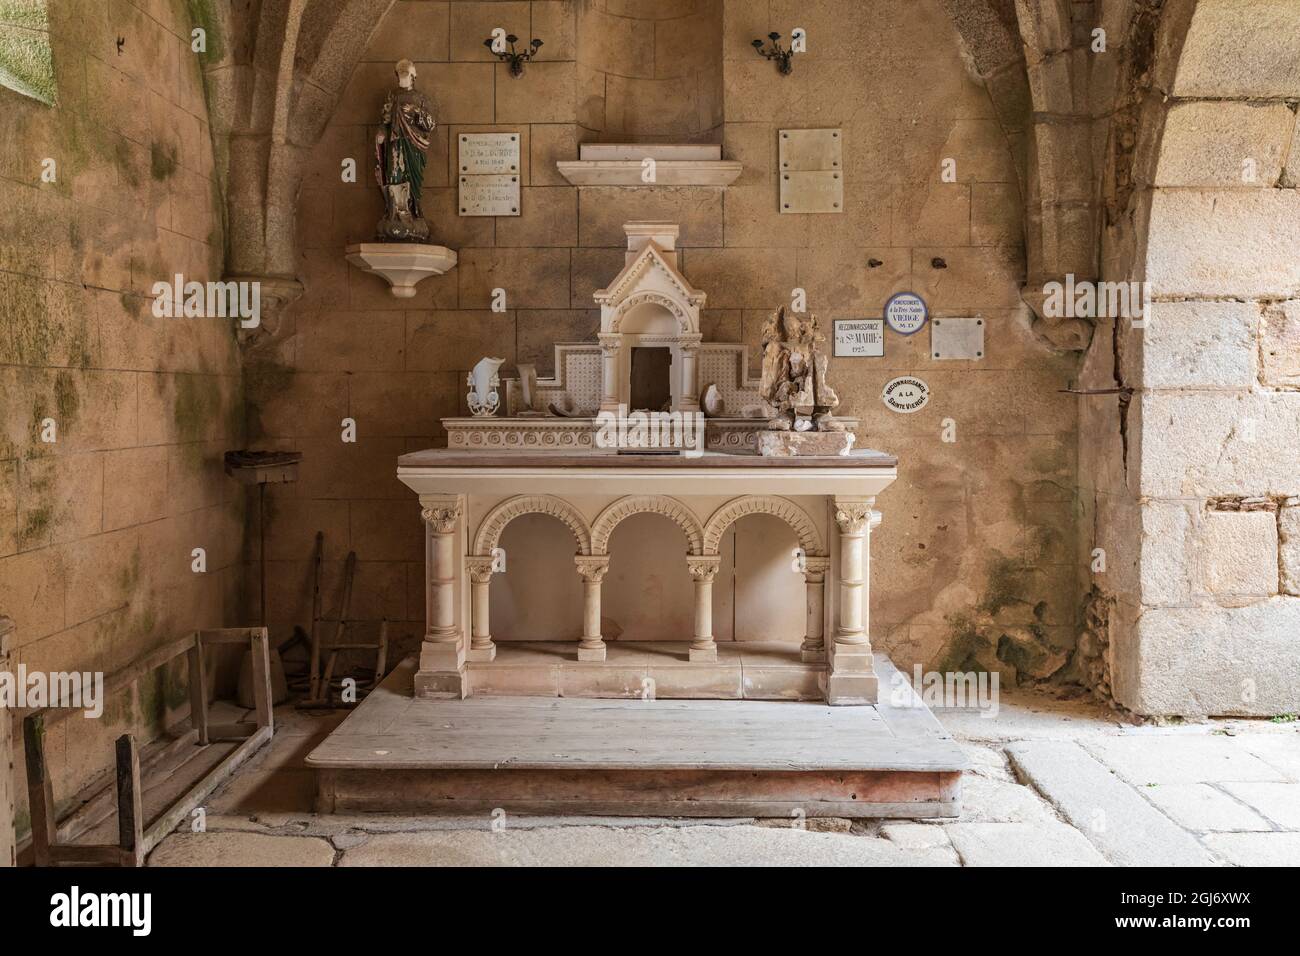 Europe, France, Haute-Vienne, Oradour-sur-Glane. Altar in the ruined stone church in the martyr village of Oradour-sur-Glane. (Editorial Use Only) Stock Photo